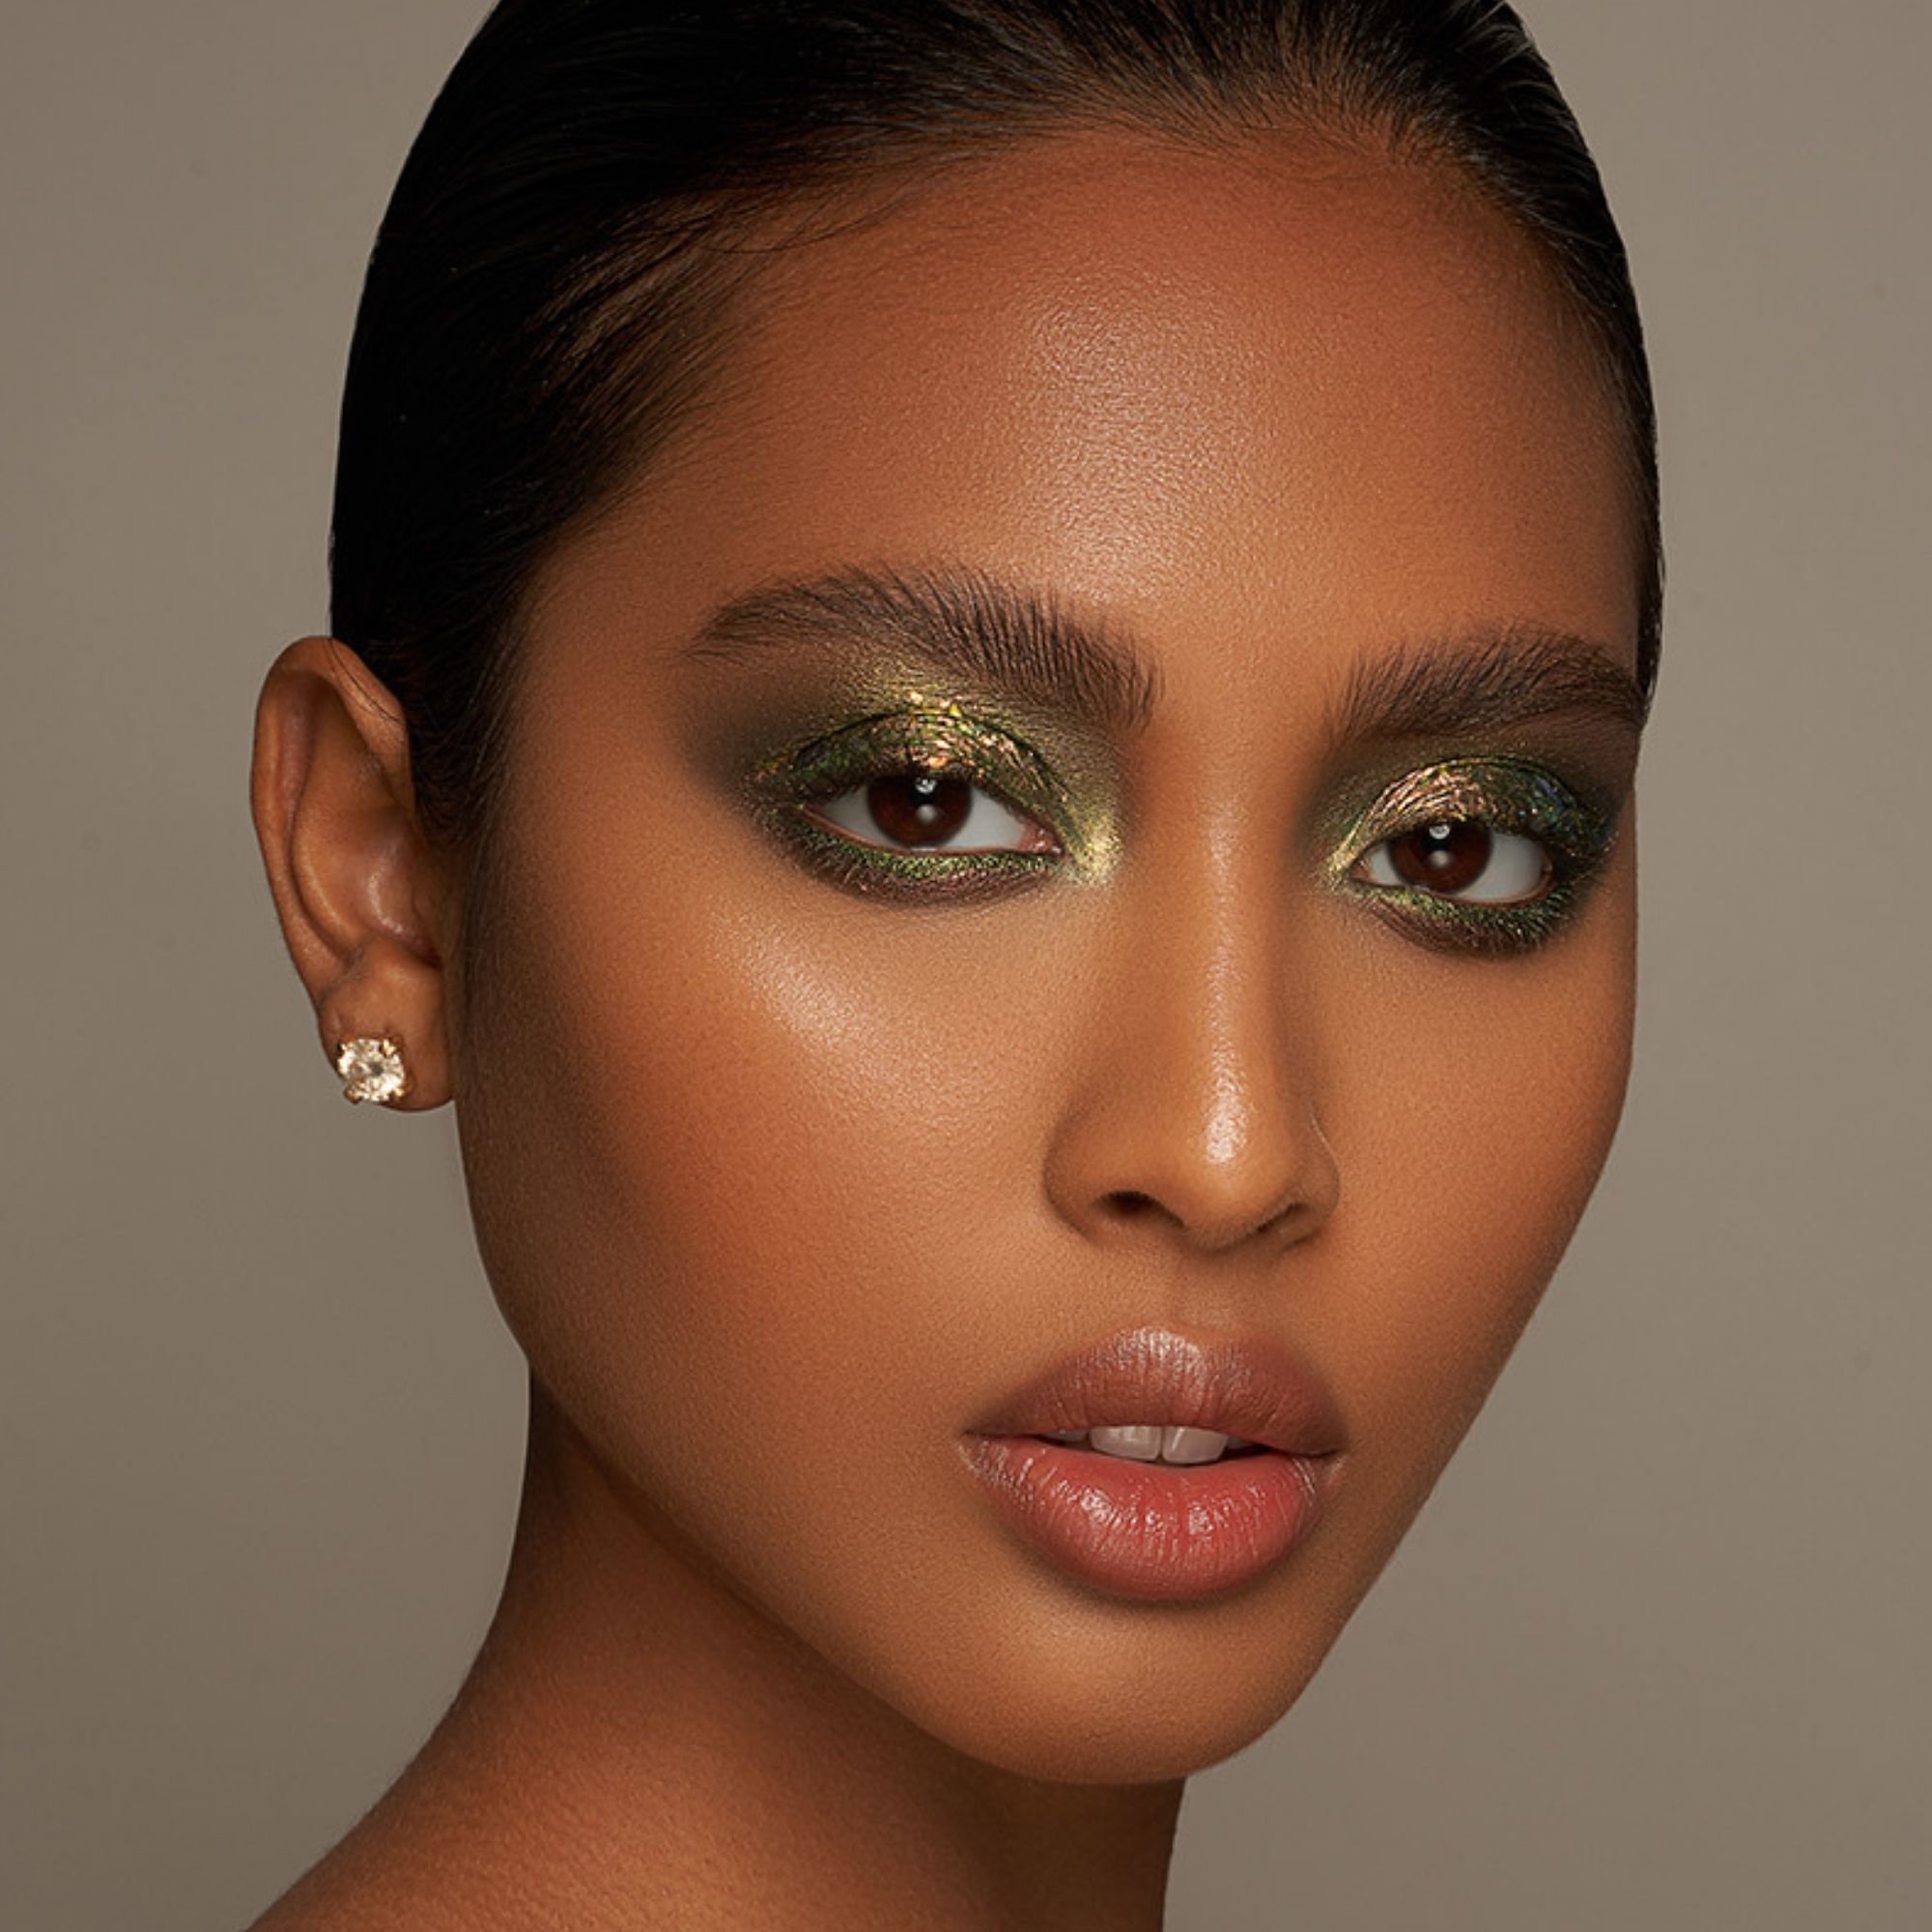 Model wearing shade Firefly over a base of shade "Gaia" from the Lightwork 3 Palette